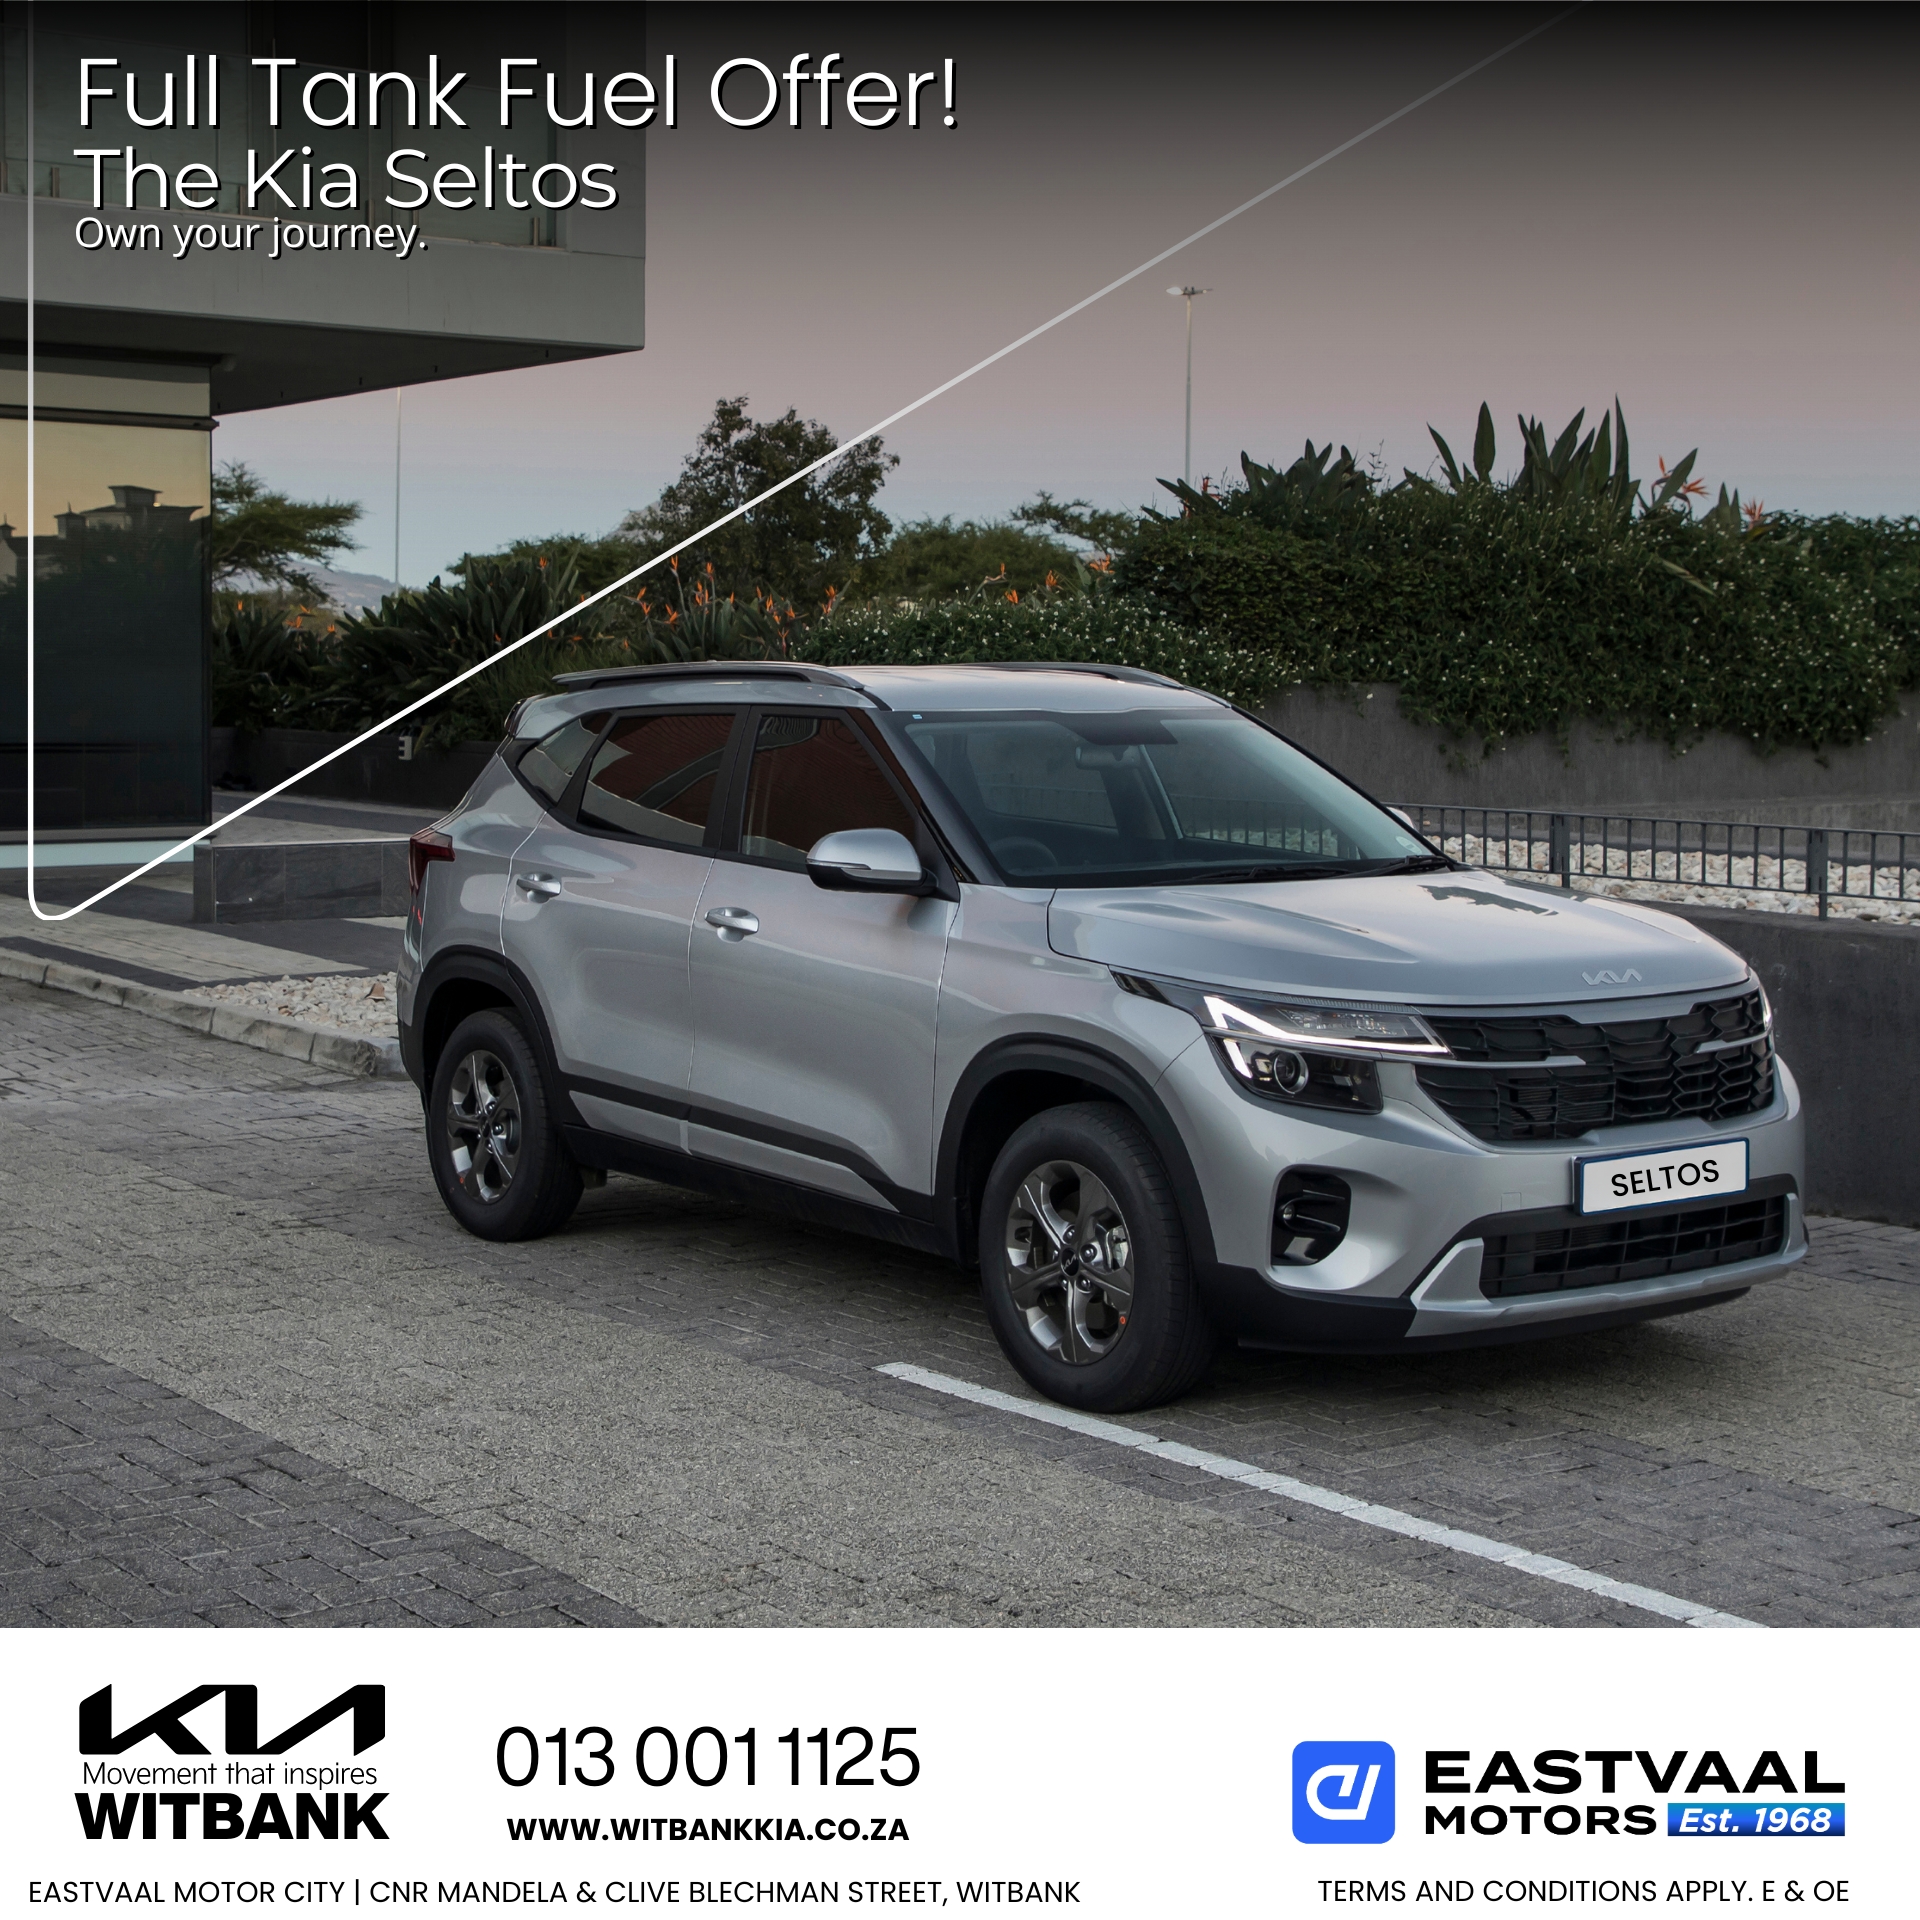 Drive into July with unbeatable deals on Kia vehicles at Eastvaal Motor City image from 